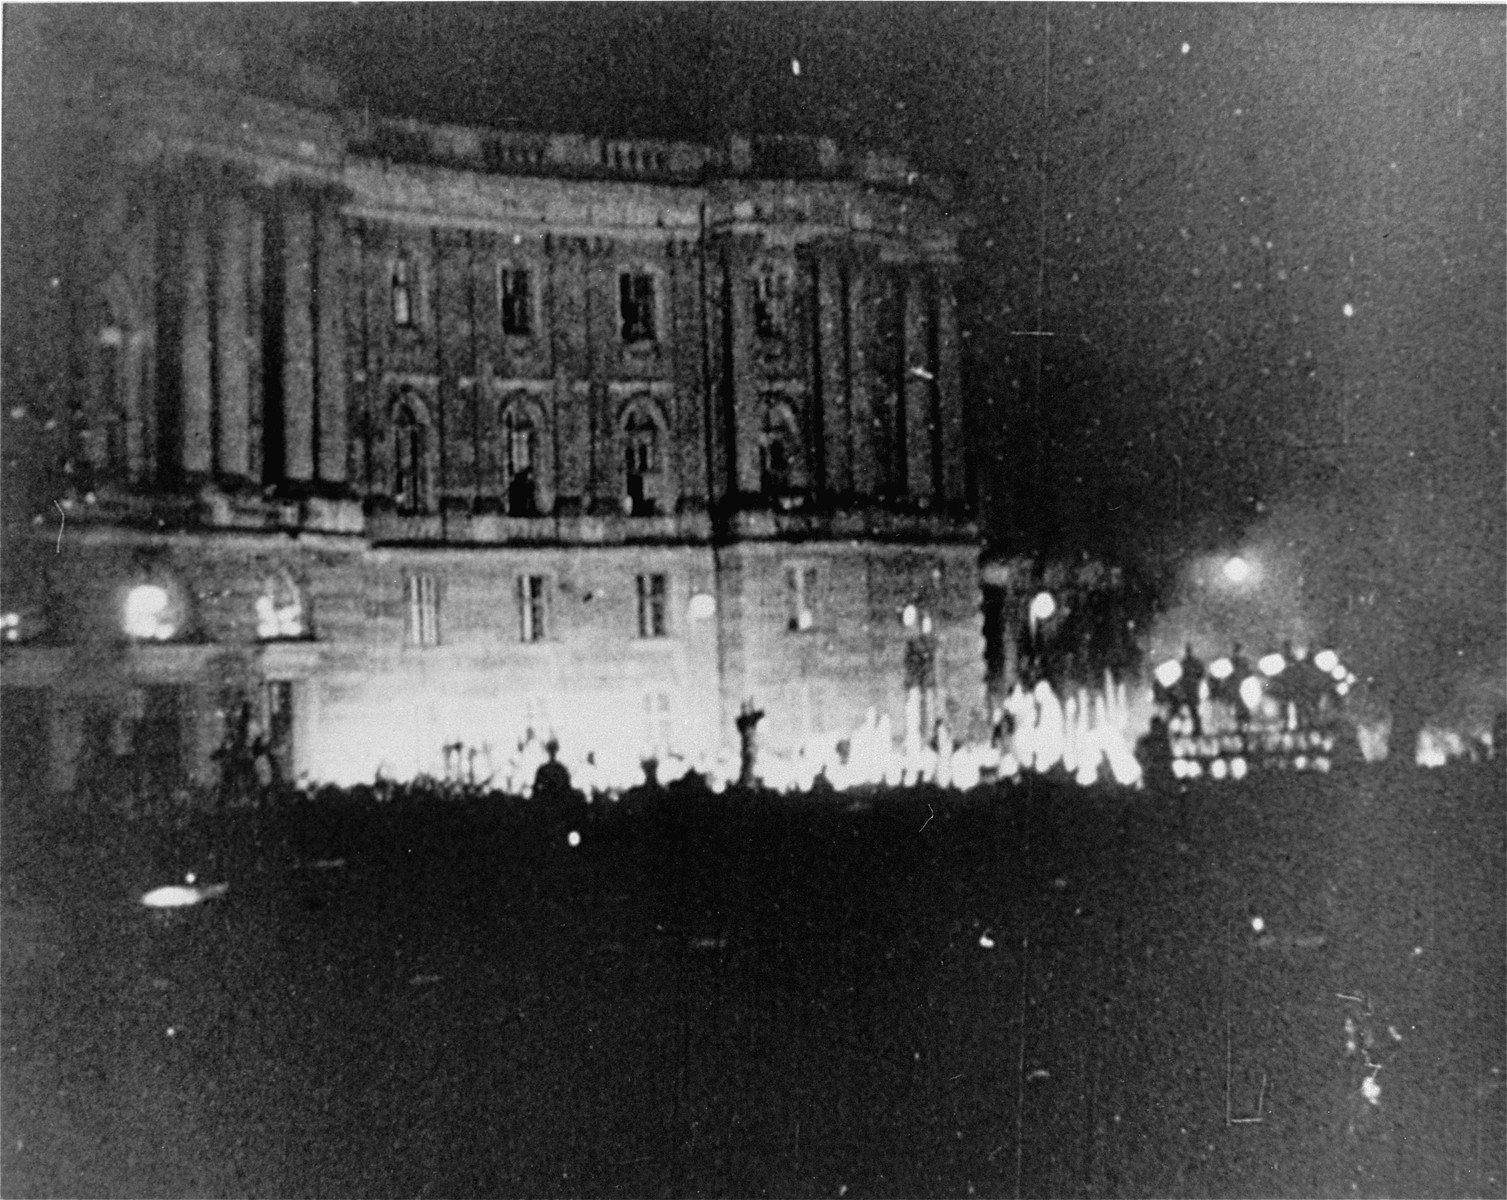 The public burning of "un-German" books by members of the SA and university students on the Opernplatz in Berlin. 

Still from a motion picture.